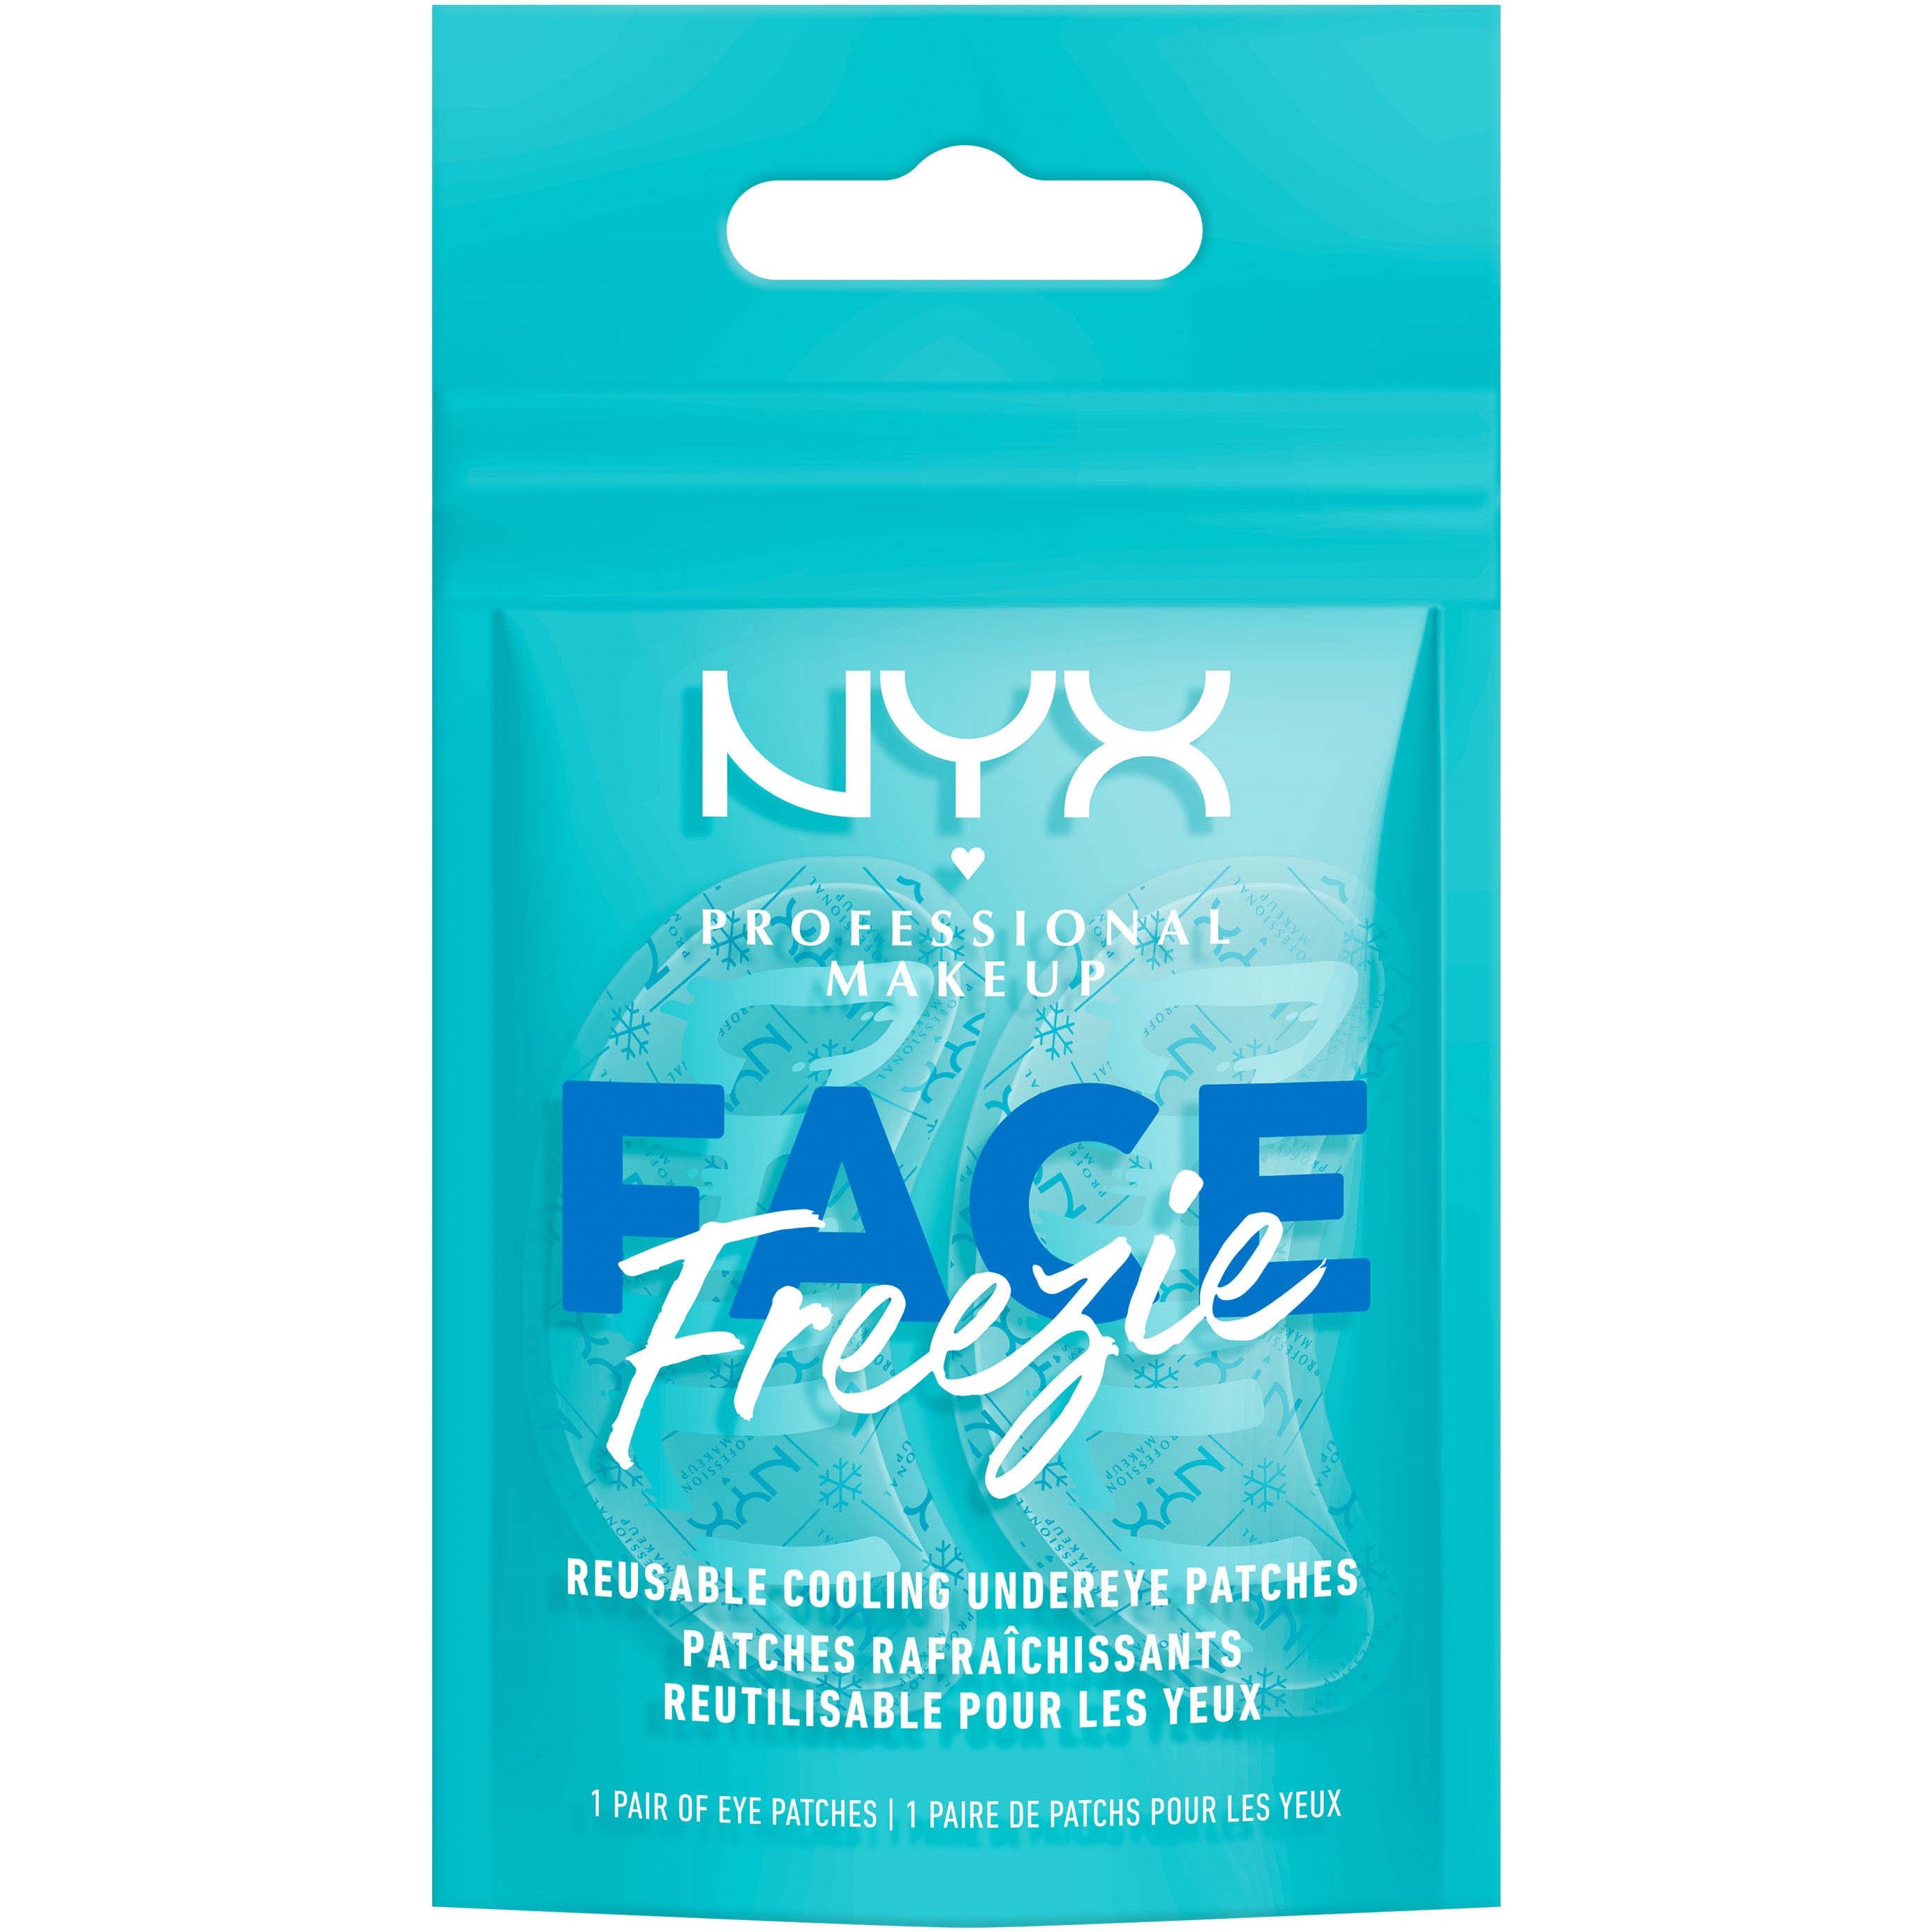 Bilde av Nyx Professional Makeup Face Freezie Reusable Cooling Undereye Patches